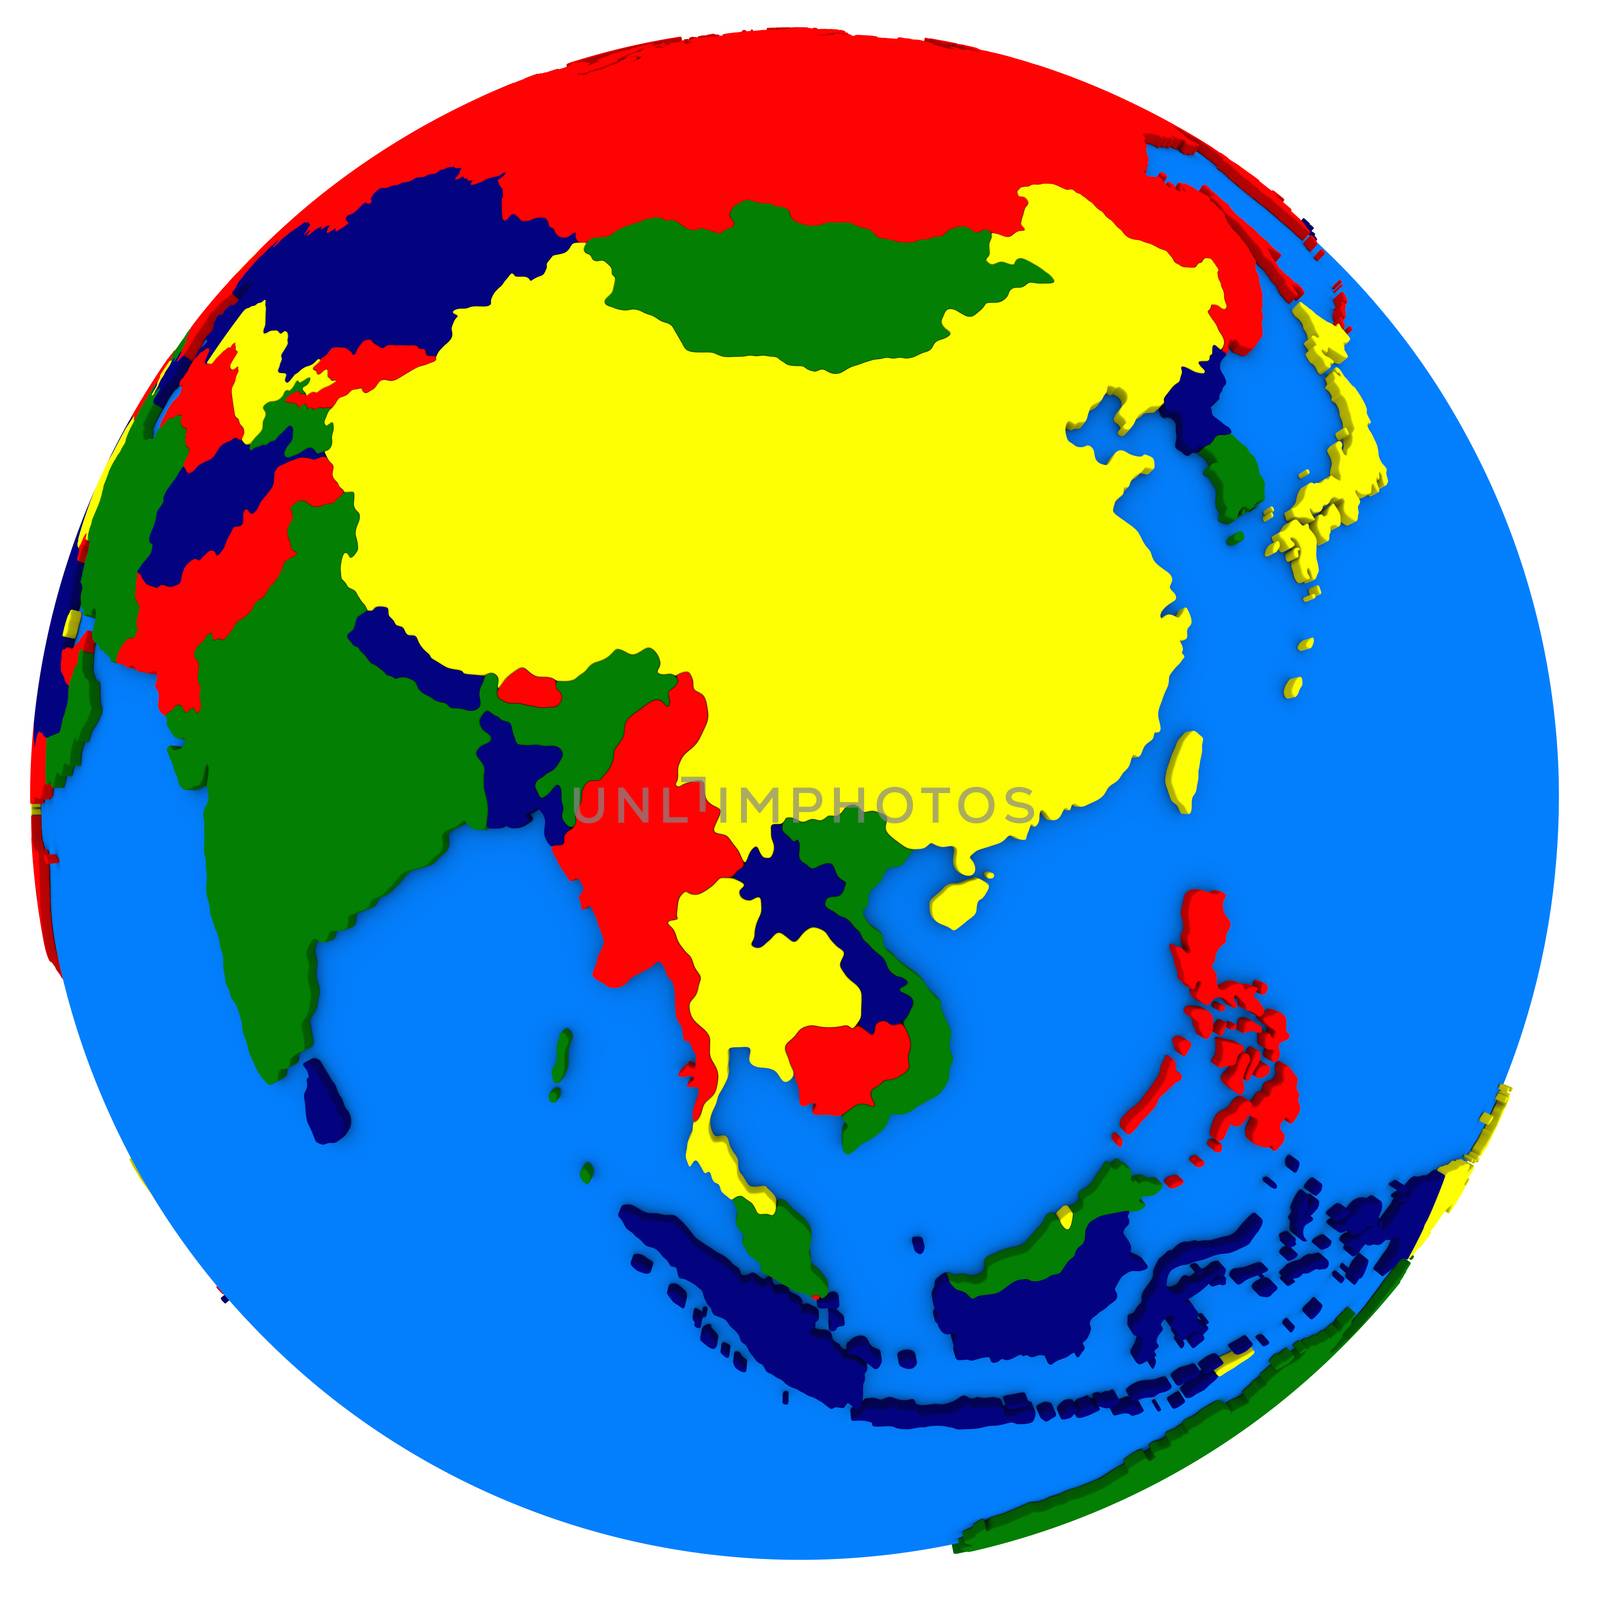 southeast Asia on political map by Harvepino